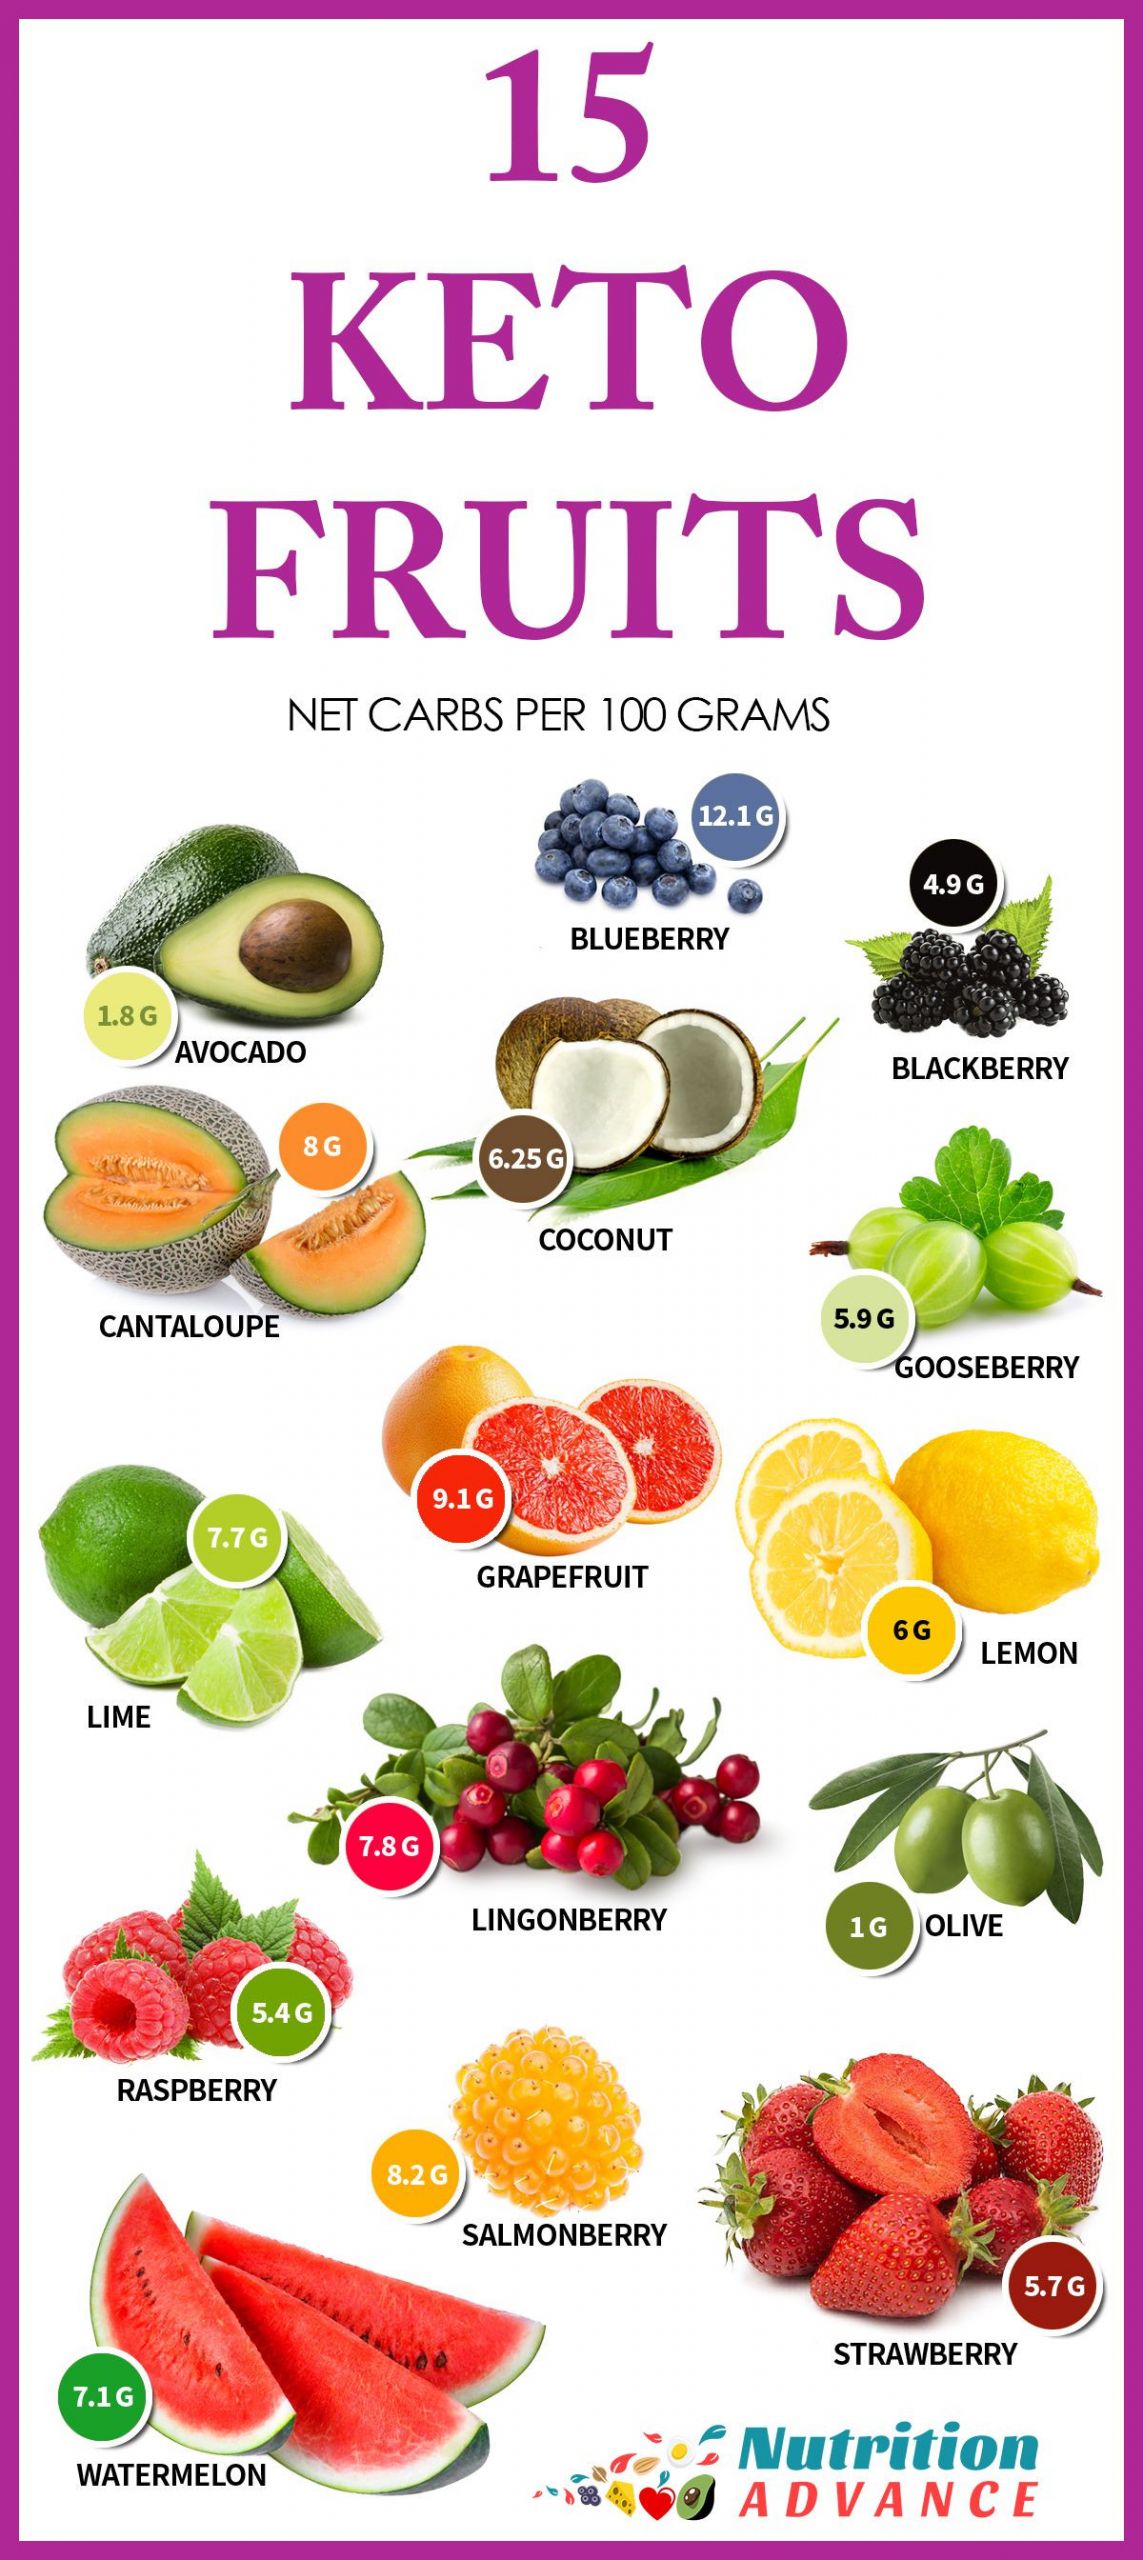 Fruits Keto Diet
 The 15 Best Low Carb Fruits